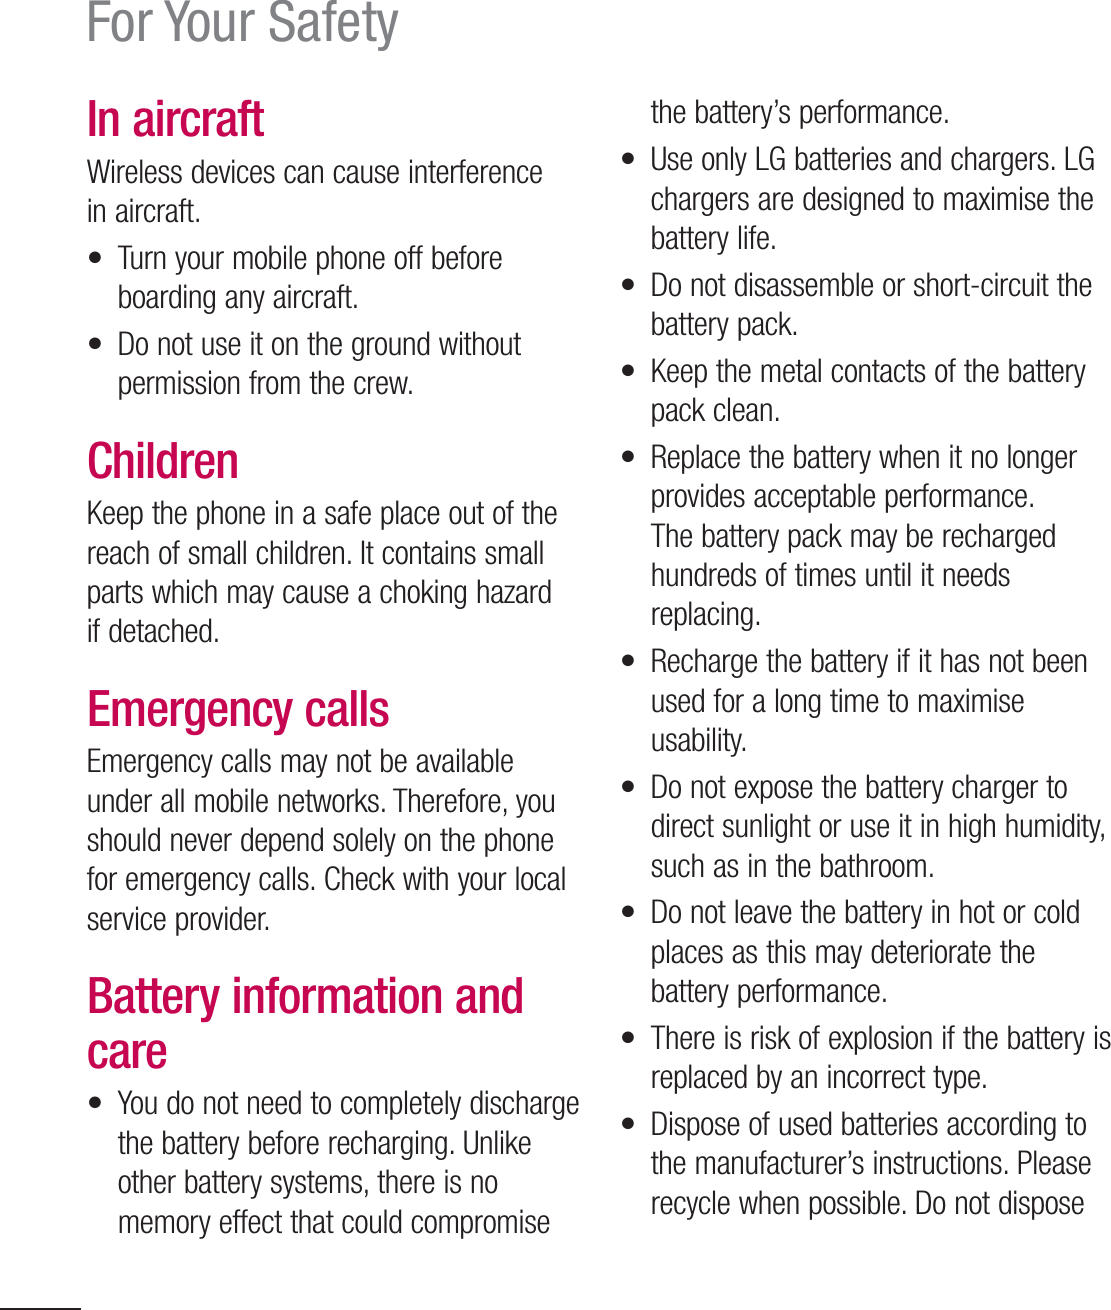 10For Your SafetyIn aircraftWireless devices can cause interference in aircraft.•  Turn your mobile phone off before boarding any aircraft.•  Do not use it on the ground without permission from the crew.ChildrenKeep the phone in a safe place out of the reach of small children. It contains small parts which may cause a choking hazard if detached.Emergency callsEmergency calls may not be available under all mobile networks. Therefore, you should never depend solely on the phone for emergency calls. Check with your local service provider.Battery information and care•  You do not need to completely discharge the battery before recharging. Unlike other battery systems, there is no memory effect that could compromise the battery’s performance.•  Use only LG batteries and chargers. LG chargers are designed to maximise the battery life.•  Do not disassemble or short-circuit the battery pack.•  Keep the metal contacts of the battery pack clean.•  Replace the battery when it no longer provides acceptable performance. The battery pack may be recharged hundreds of times until it needs replacing.•  Recharge the battery if it has not been used for a long time to maximise usability.•  Do not expose the battery charger to direct sunlight or use it in high humidity, such as in the bathroom.•  Do not leave the battery in hot or cold places as this may deteriorate the battery performance.•  There is risk of explosion if the battery is replaced by an incorrect type.•  Dispose of used batteries according to the manufacturer’s instructions. Please recycle when possible. Do not dispose 